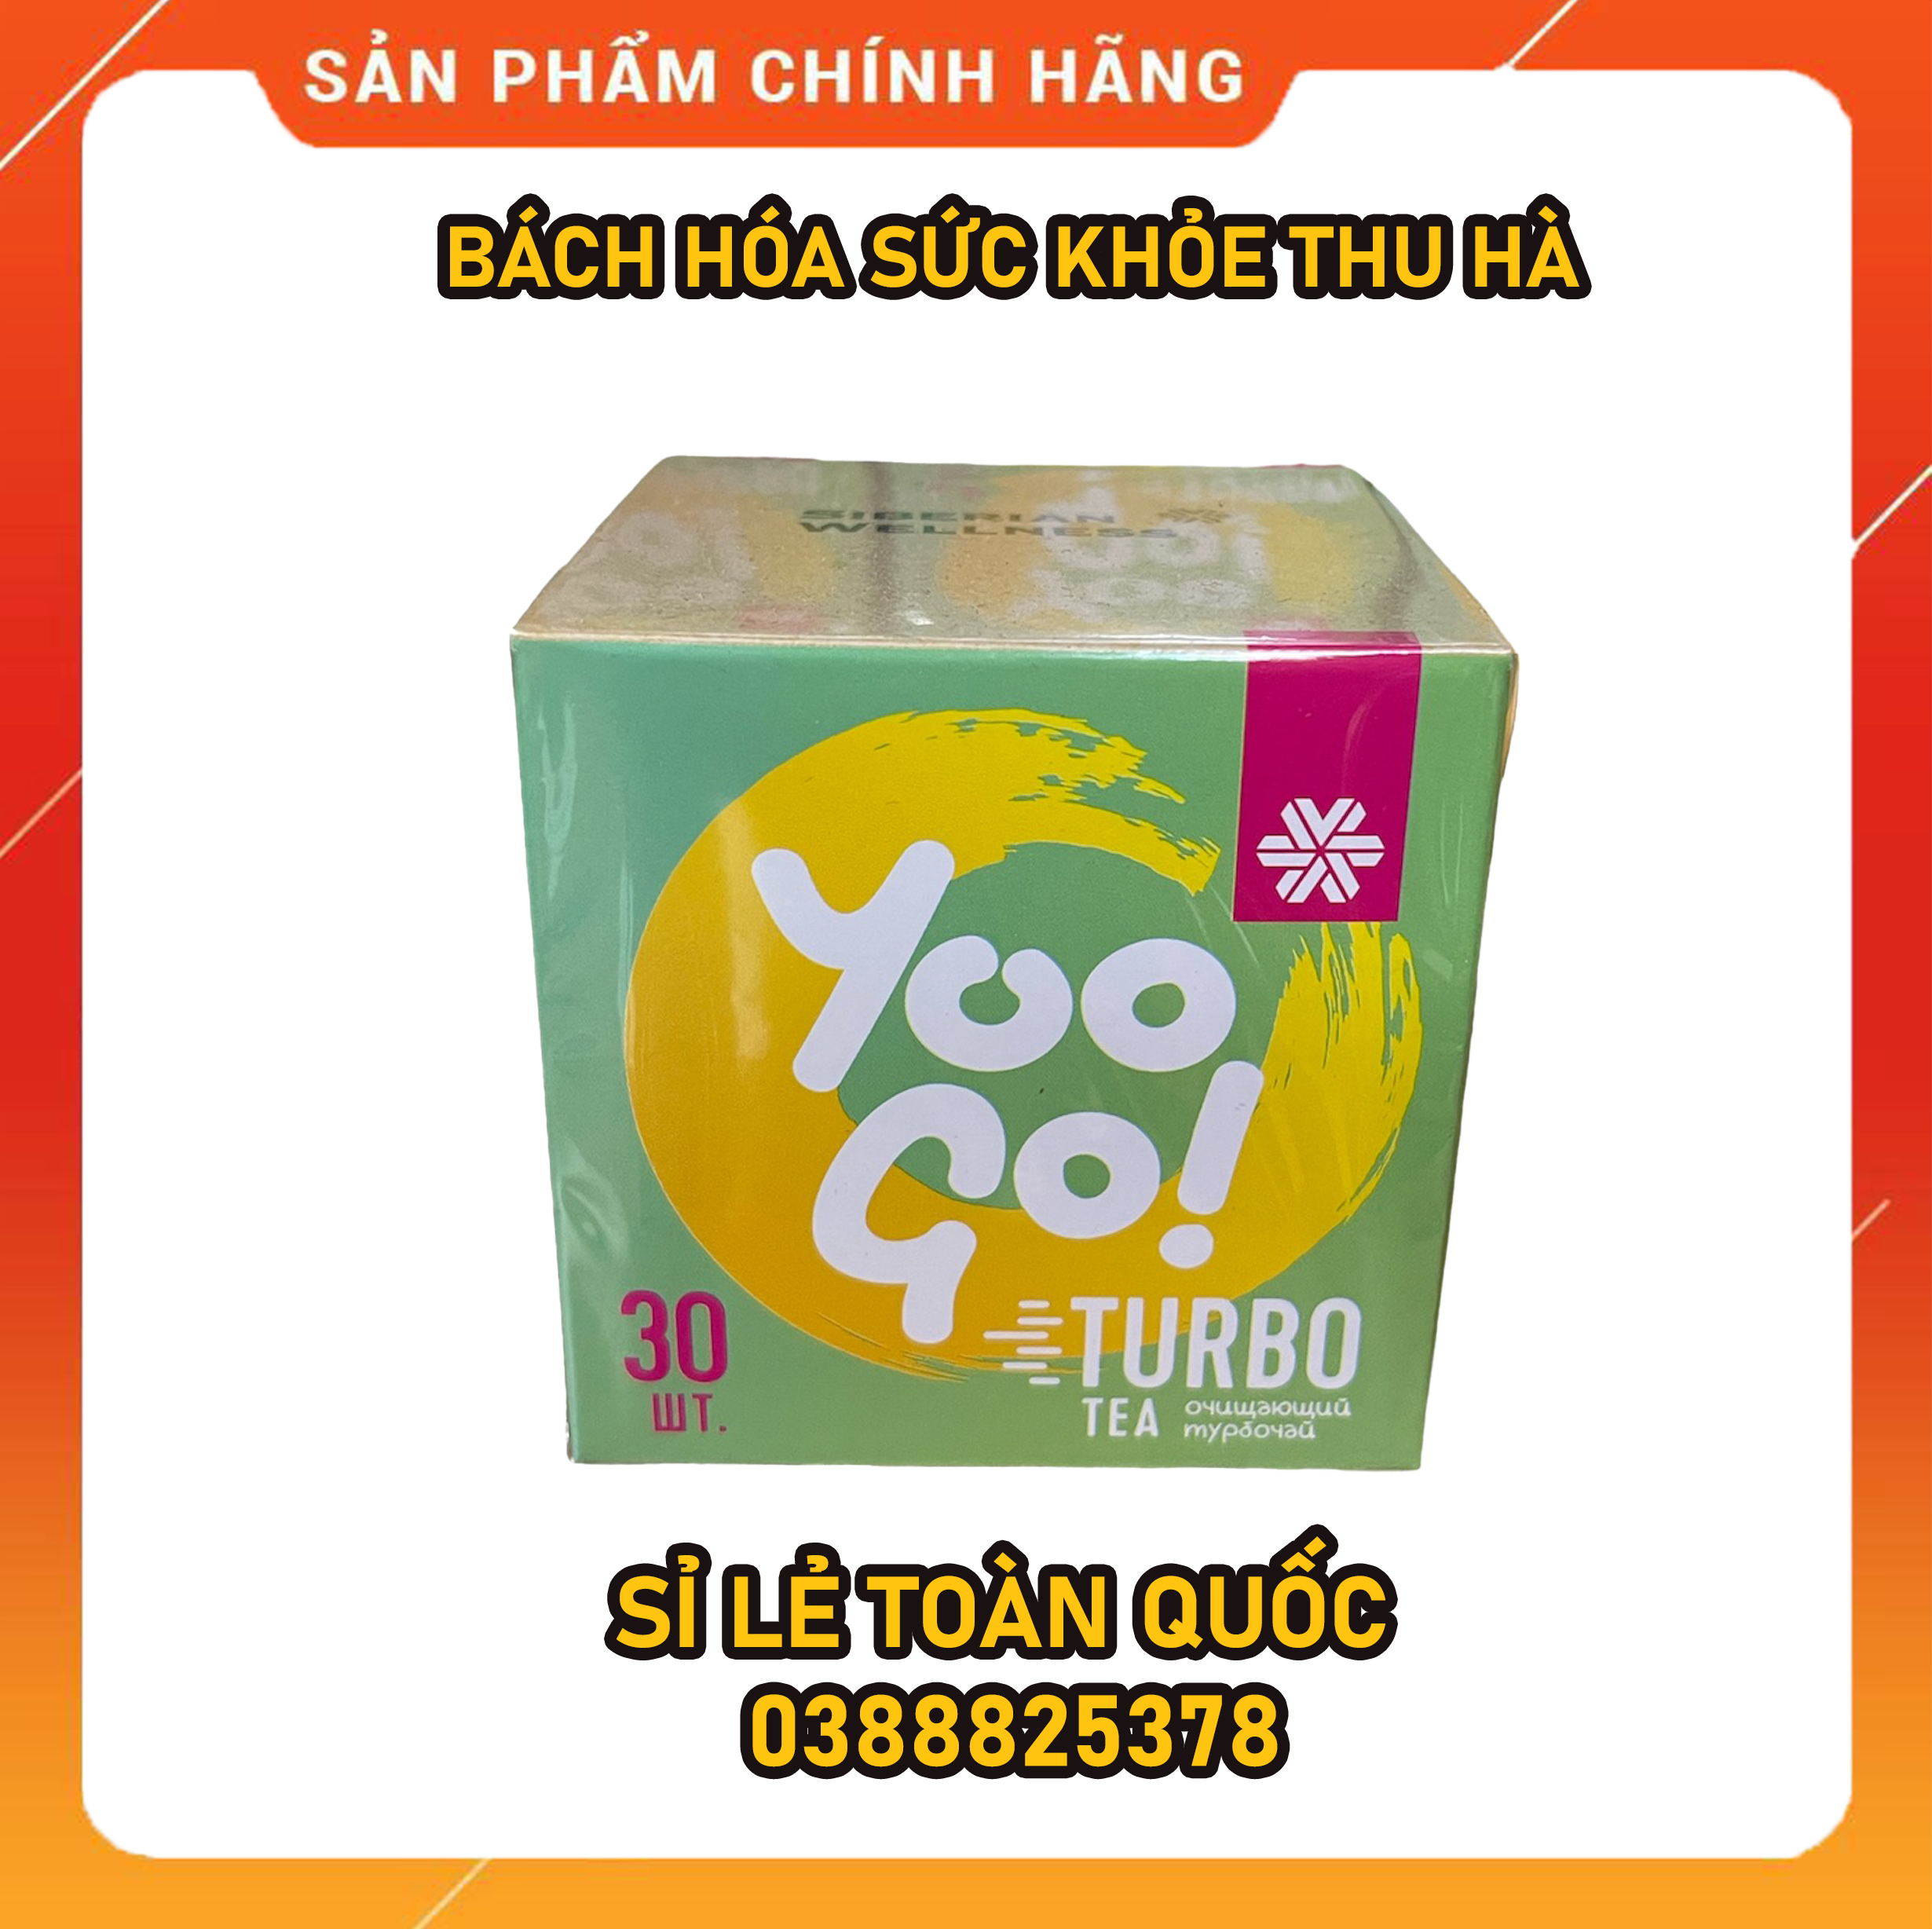 Yoo go turbo herbal tea for weight loss, health protection